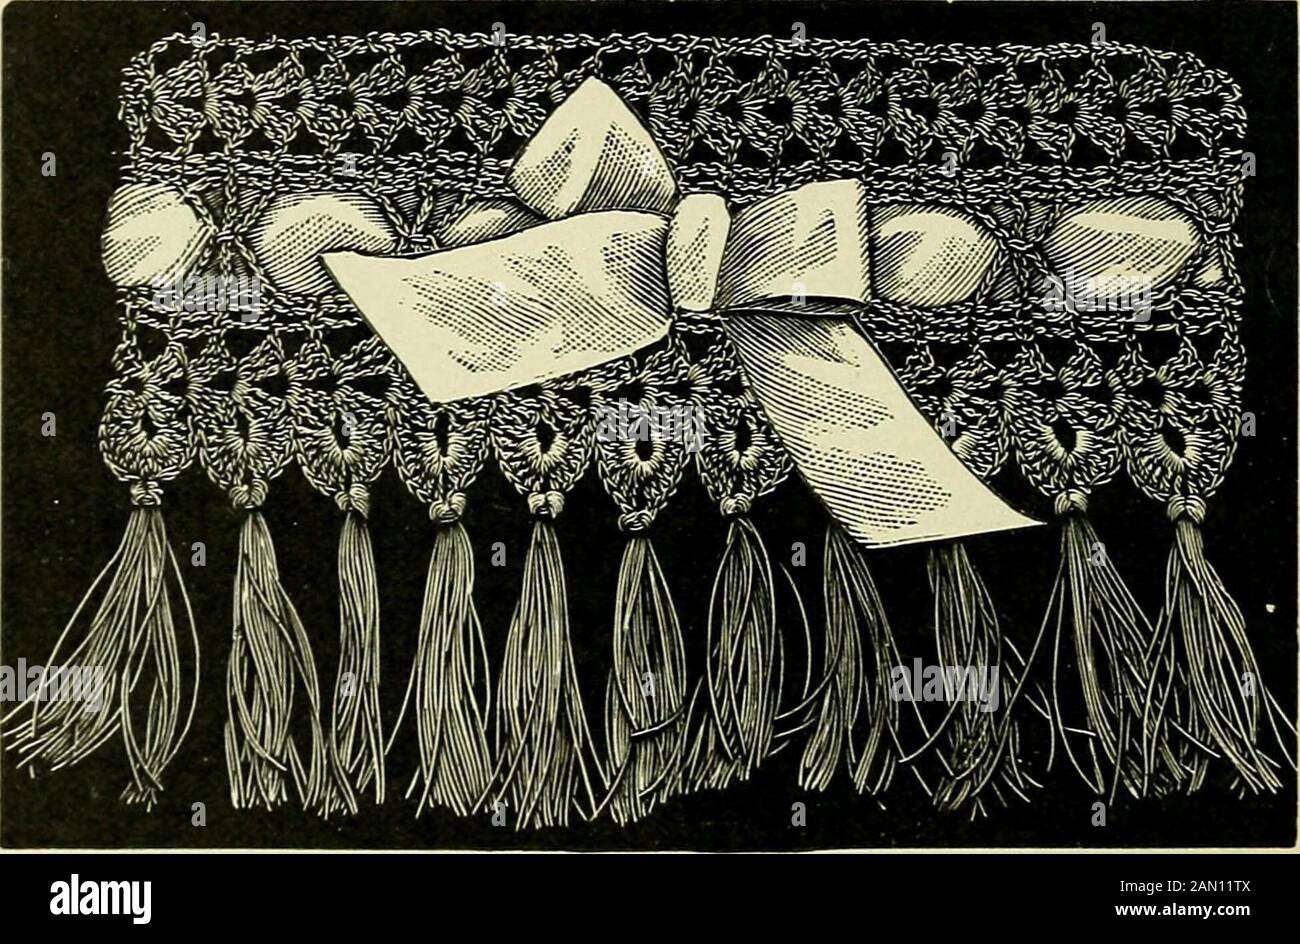 A treatise on lace-making, embroidery, and needle-work with Irish flax threads . When you have a strip long enough to extend around the chair,turn at the end of last row, crochet the ends together, taking care notto draw the thread too tightly, and crochet across the top, which isthe side of strip in which the dtc is worked under 4 ch, thus makinga continuous connection between shells. Finish the lower edgewith a row of large scallops, putting 14 dtc under each ch of 4 con-necting shells, and fastening down with 1 dc between the shells not 118 barbours prize needle-work series. connected. Tie Stock Photo